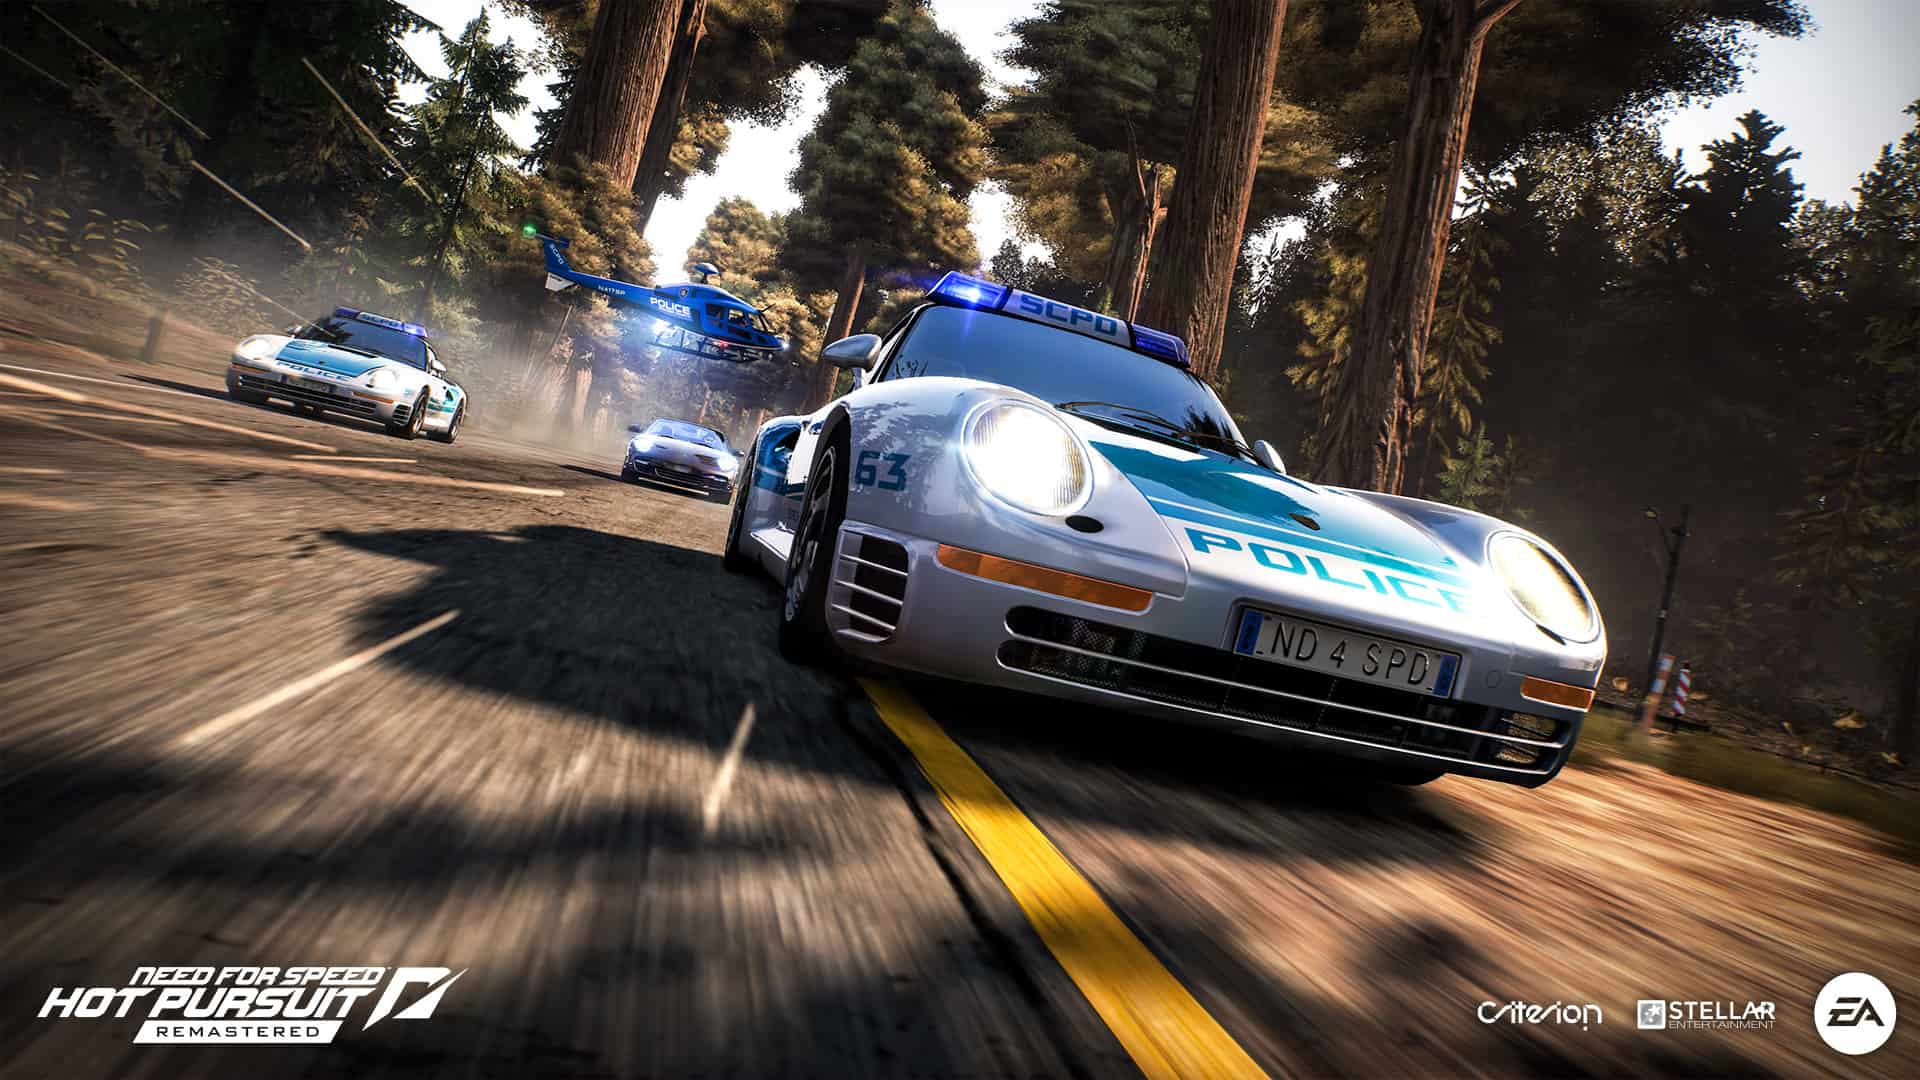 New Need for Speed game set for release in 2022